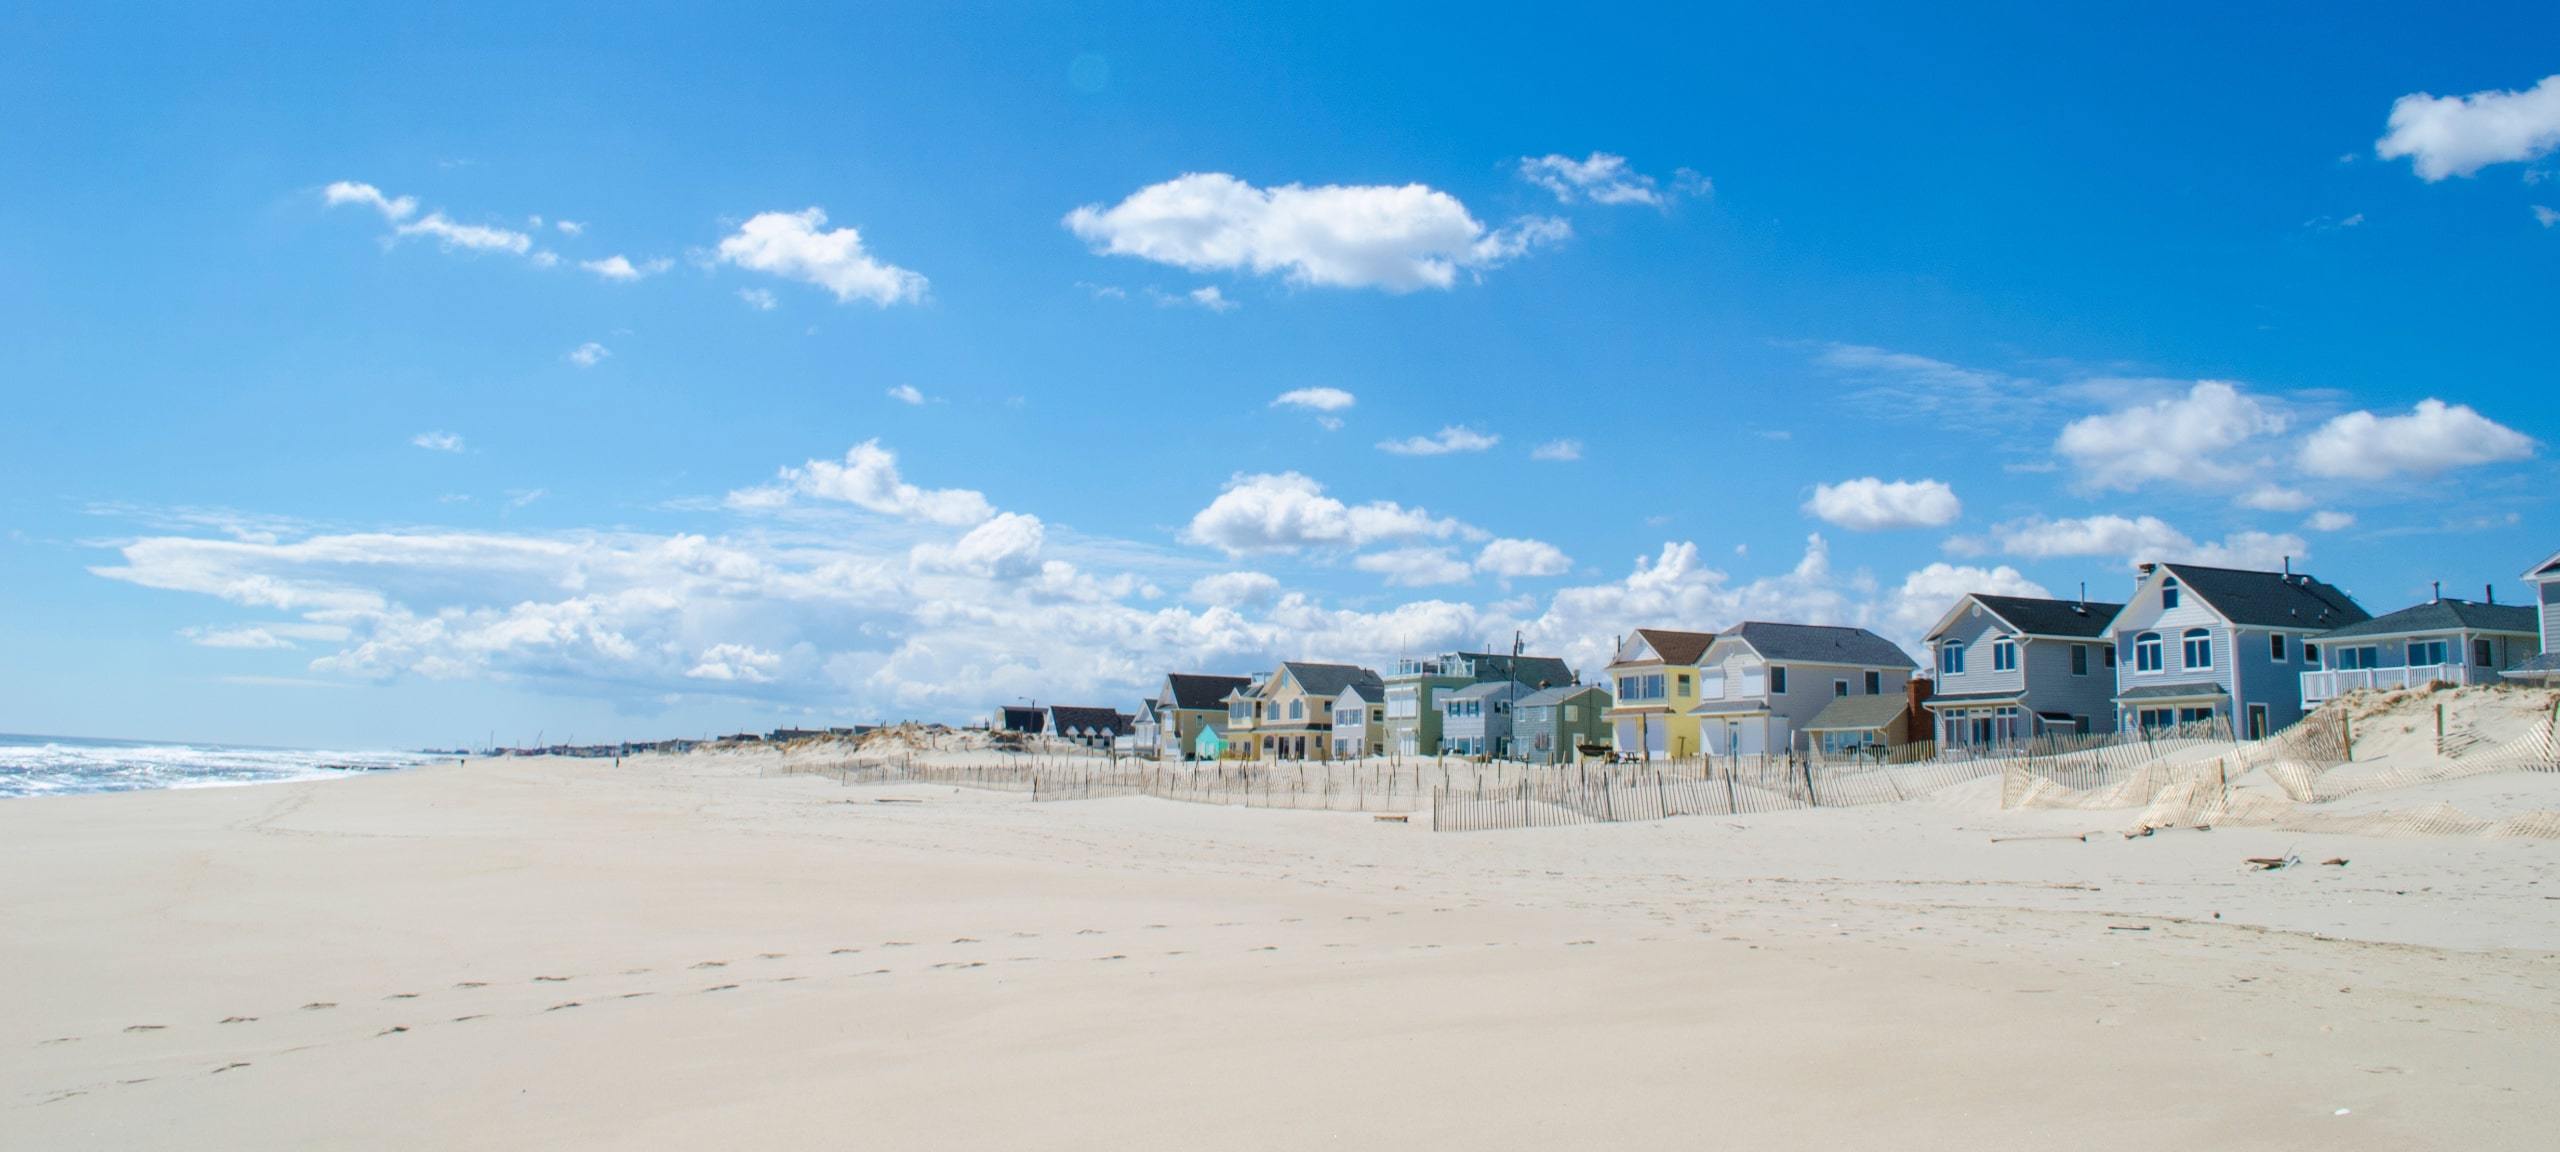 Colorful row of houses on the sunny Lavallette, NJ beach